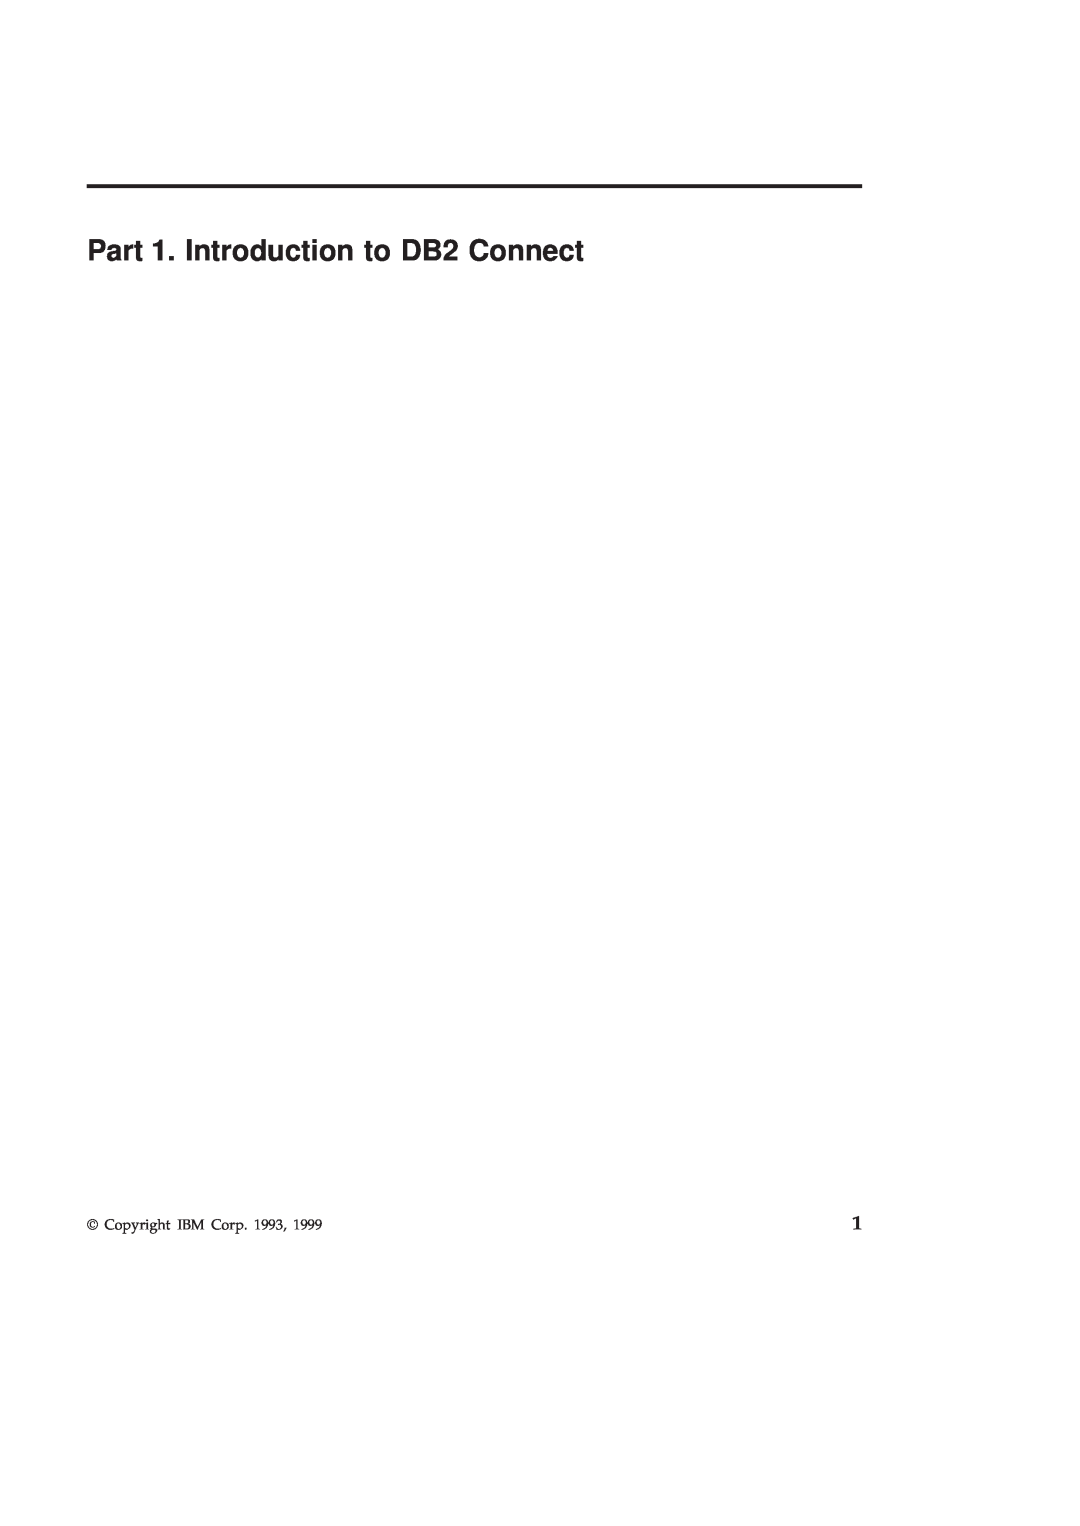 IBM GC09-2830-00 manual Part 1. Introduction to DB2 Connect, Copyright IBM Corp. 1993 